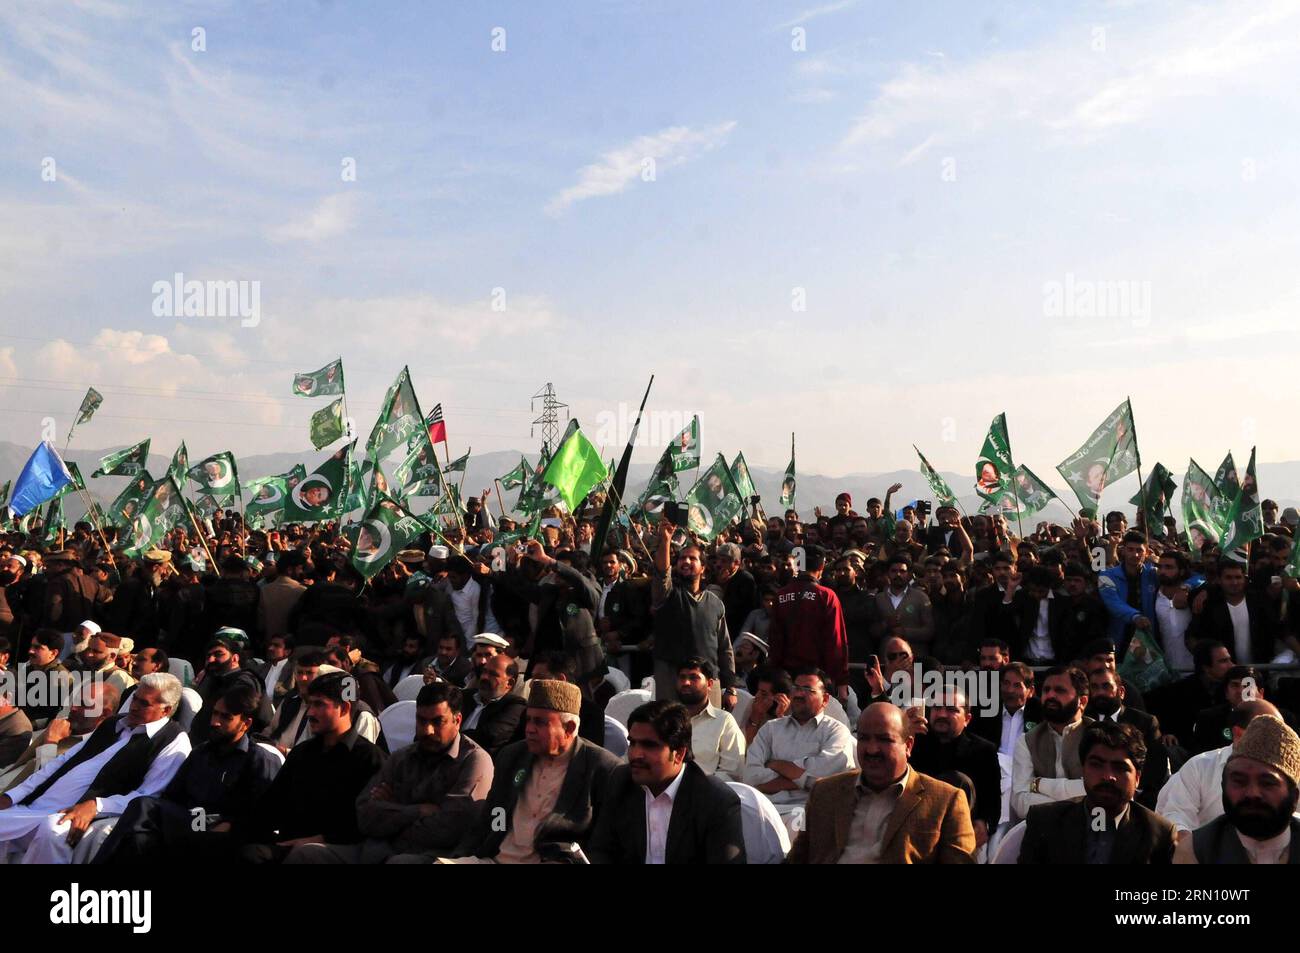 (141129) -- HAVELIAN, Nov. 29, 2014 -- Supporters of ruling party Pakistan Muslim League-Nawaz (PML-N) gathered during a public meeting in northwest Pakistan s Havelian on Nov. 29, 2014. Pakistani Prime Minister Nawaz Sharif addressing a huge public meeting at Havelian on Saturday said that the multi-dimensional projects being undertaken by PML-N government would make Pakistan an Asian tiger. ) PAKISTAN-HAVELIAN-NAWAZ SHARIF-PUBLIC-MEETING AhmadxKamal PUBLICATIONxNOTxINxCHN   Nov 29 2014 Supporters of ruling Party Pakistan Muslim League Nawaz PML n gathered during a Public Meeting in Northwest Stock Photo